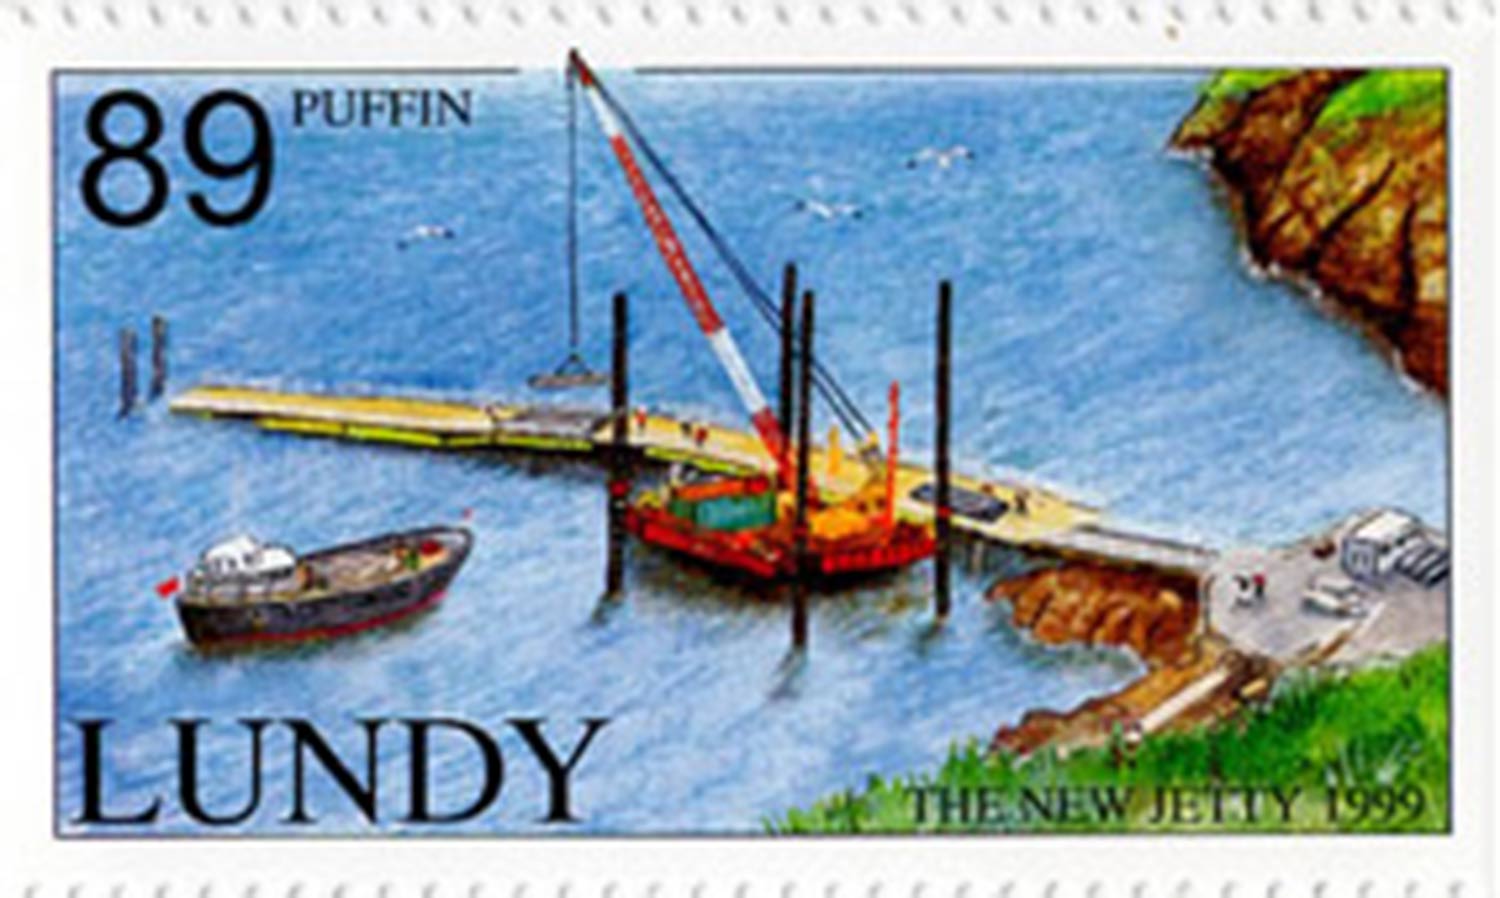 Lundy Postage Stamp